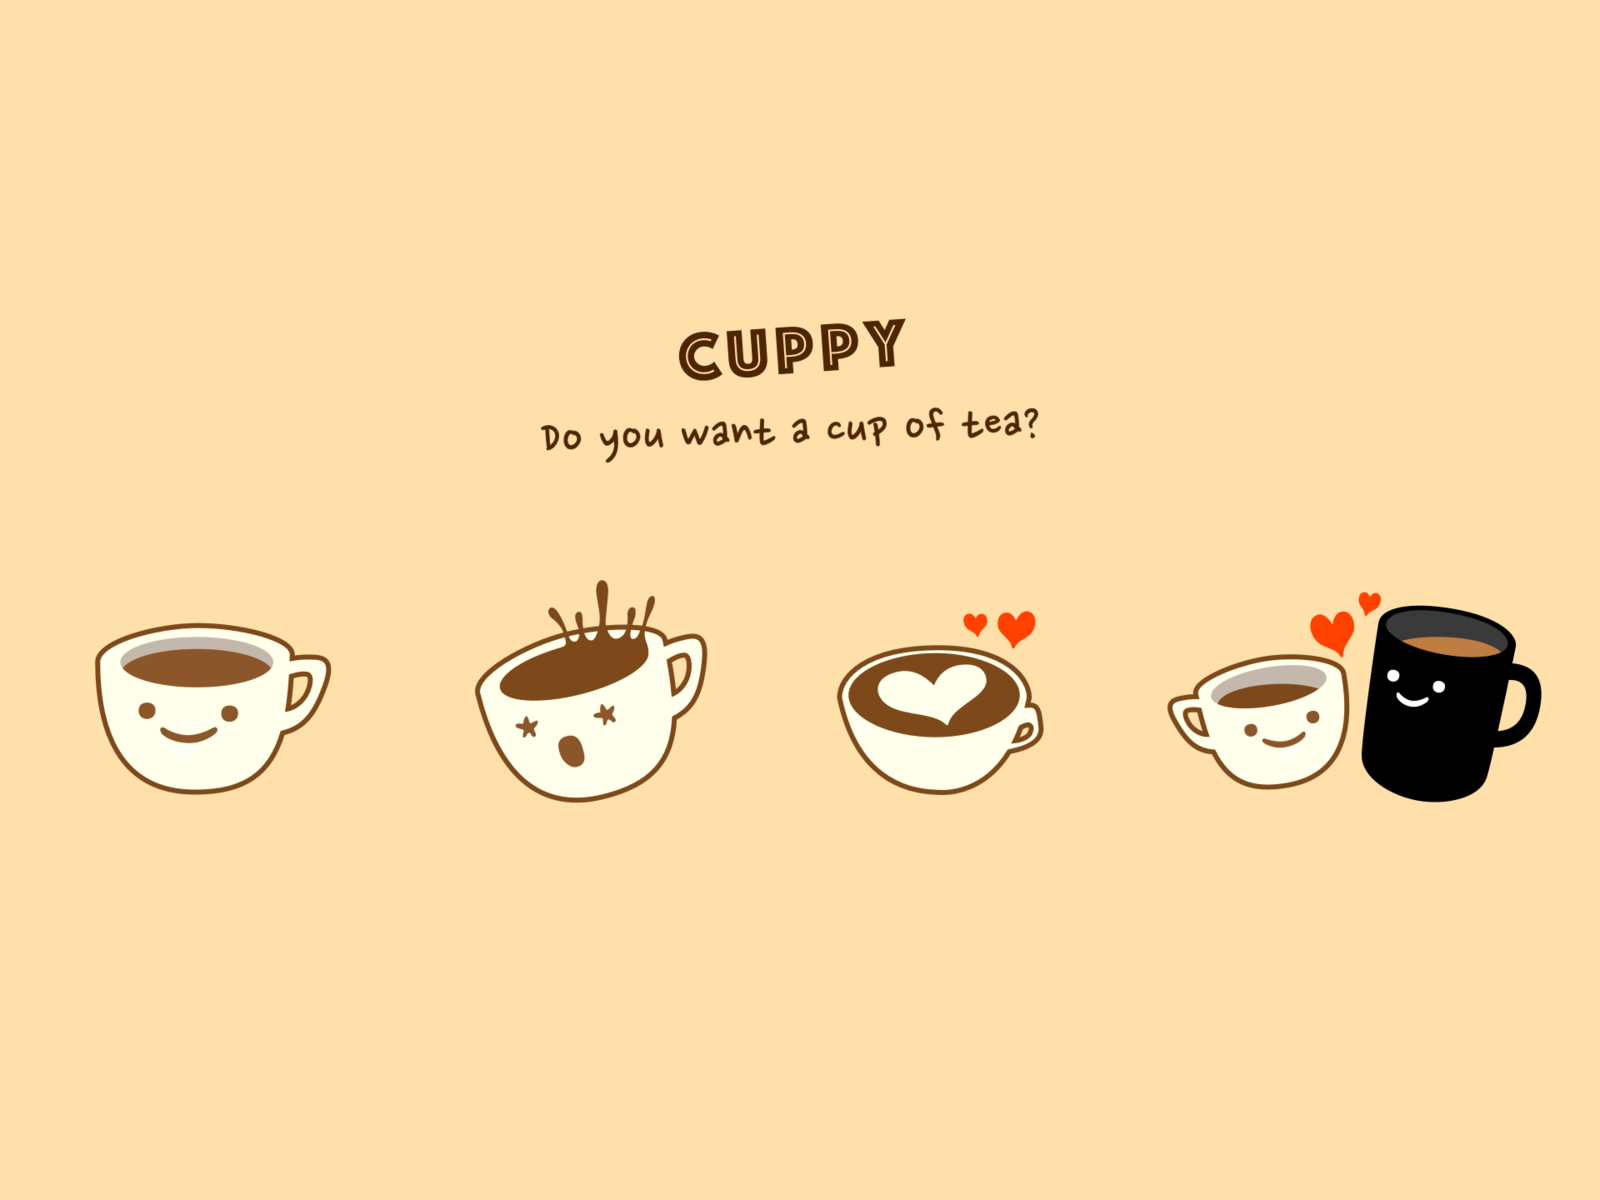 Cuppy A Whatsapp Sticker By Minseung Song On Dribbble